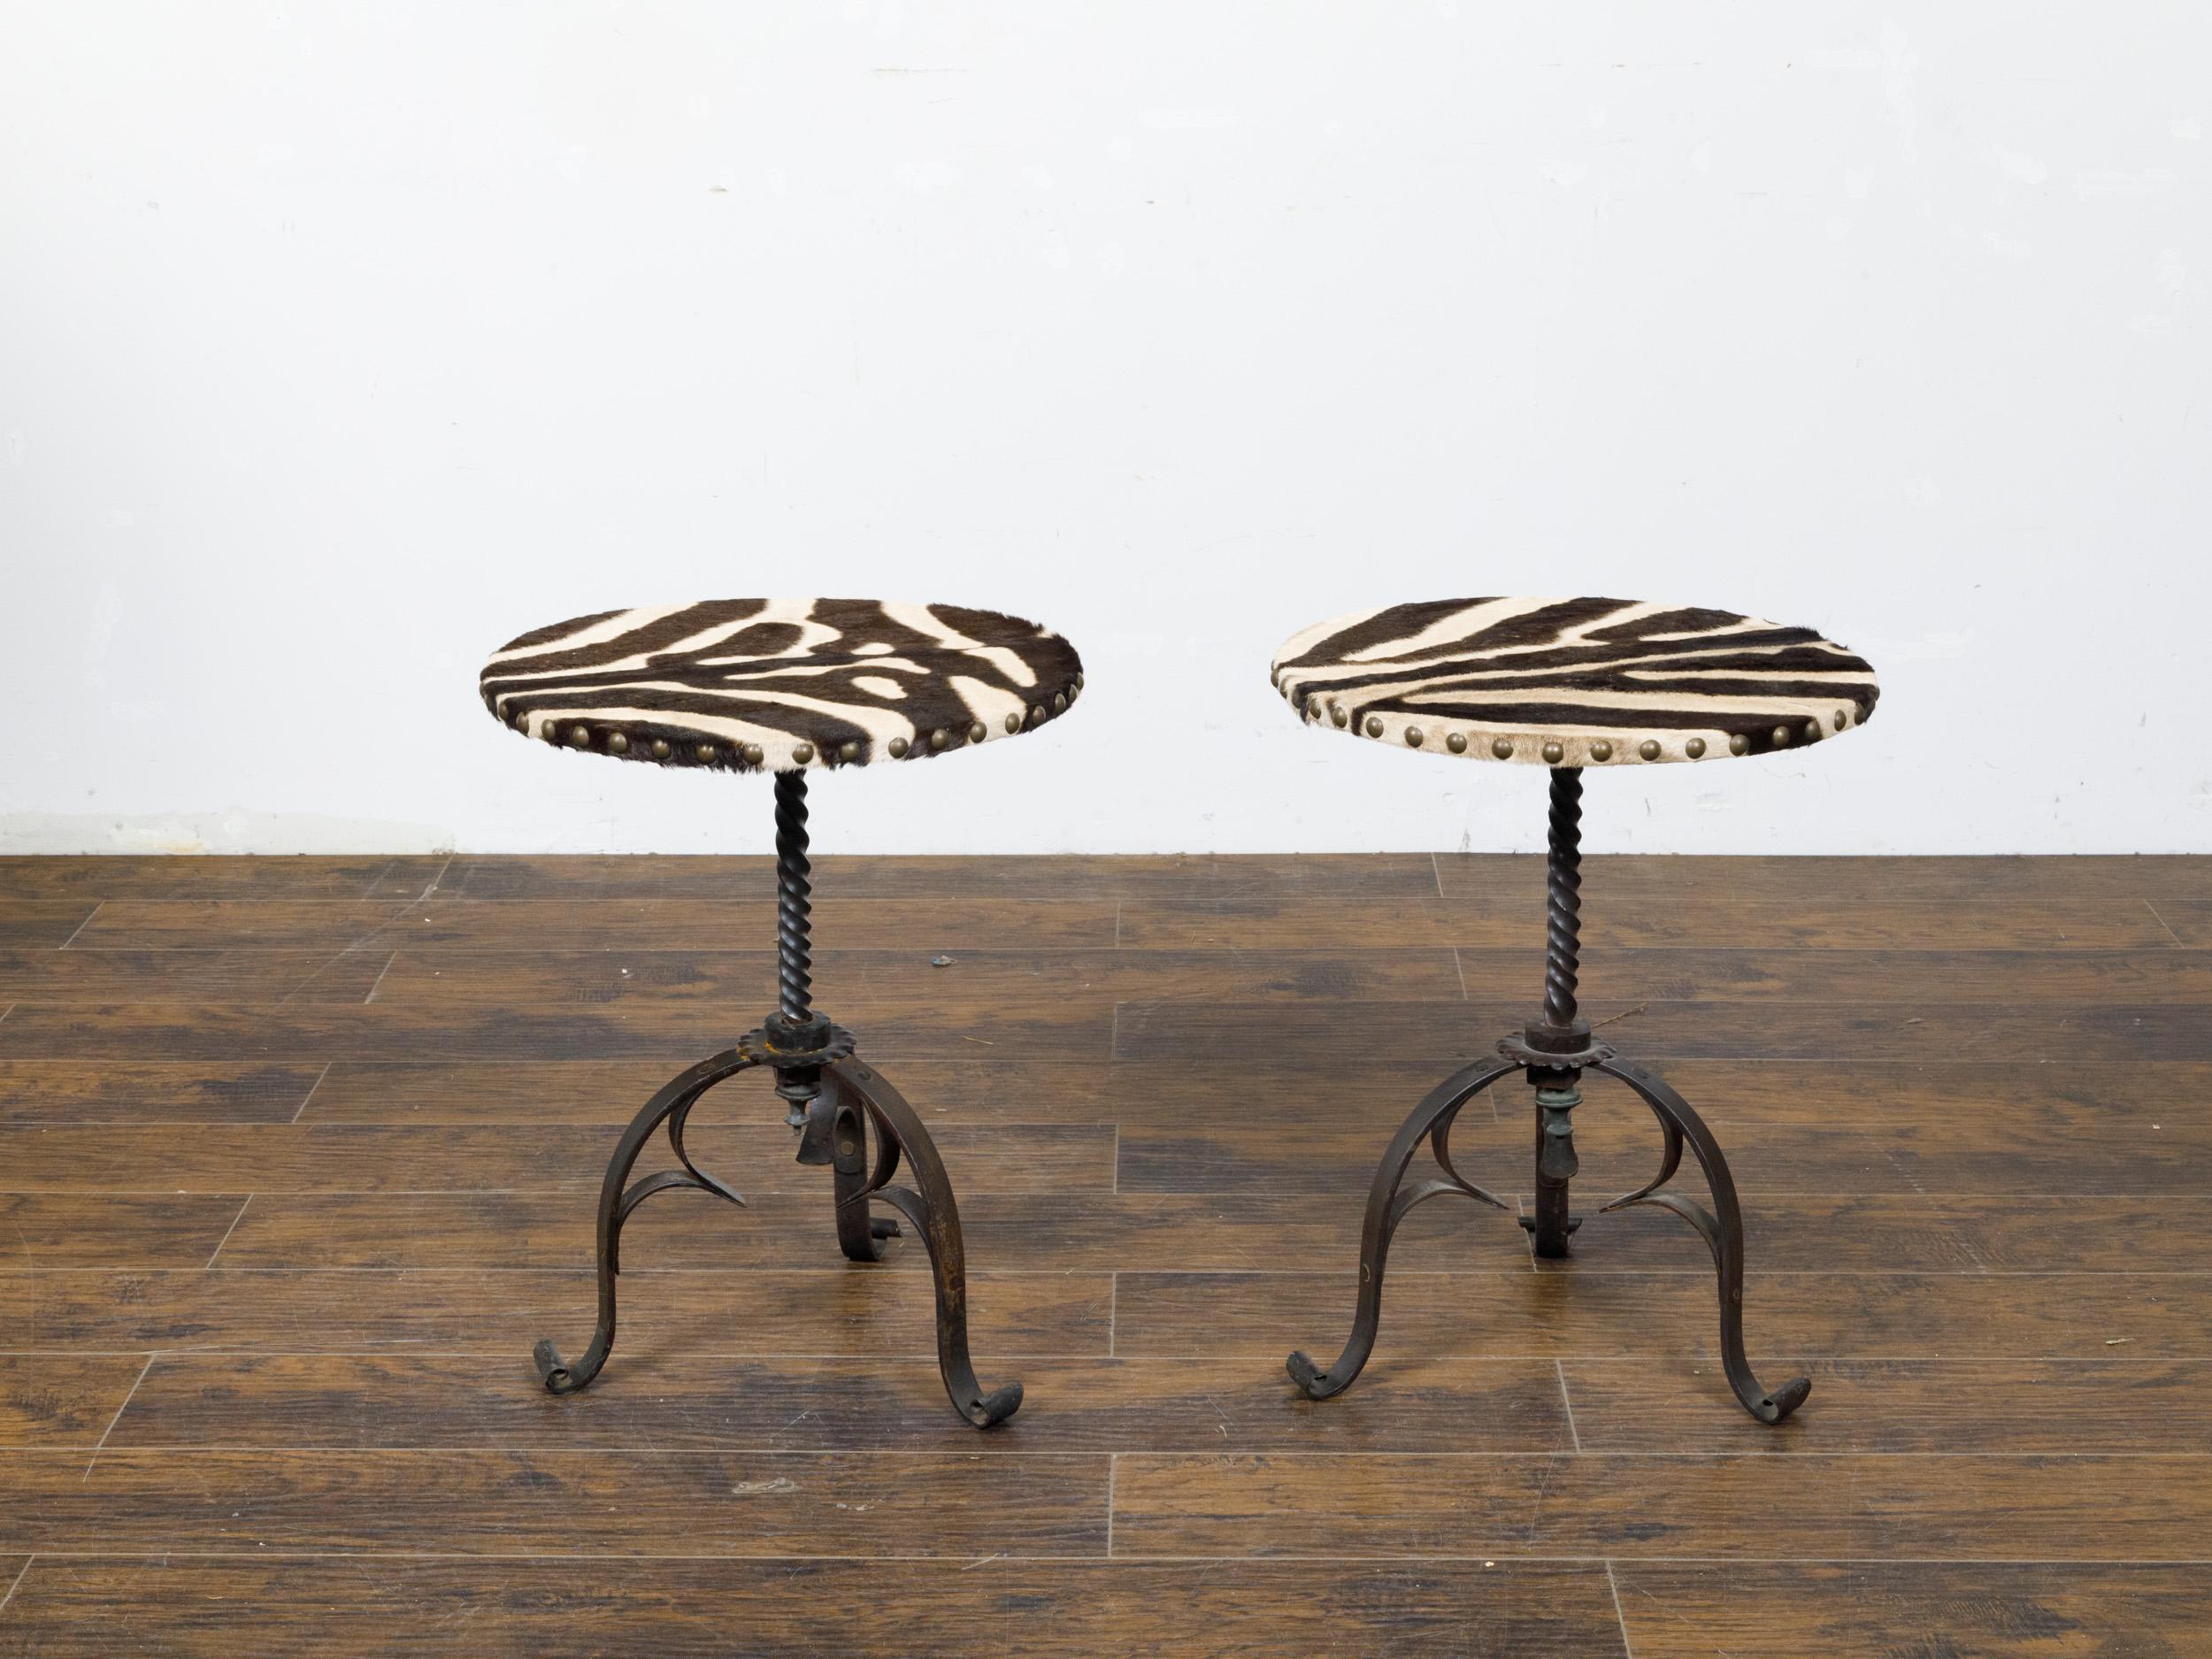 A pair of French iron guéridon side tables from the mid 20th century with round zebra hide tops, twisted bases on three scrolling legs. This captivating pair of mid-20th century French guéridon side tables exudes a unique blend of rustic charm and